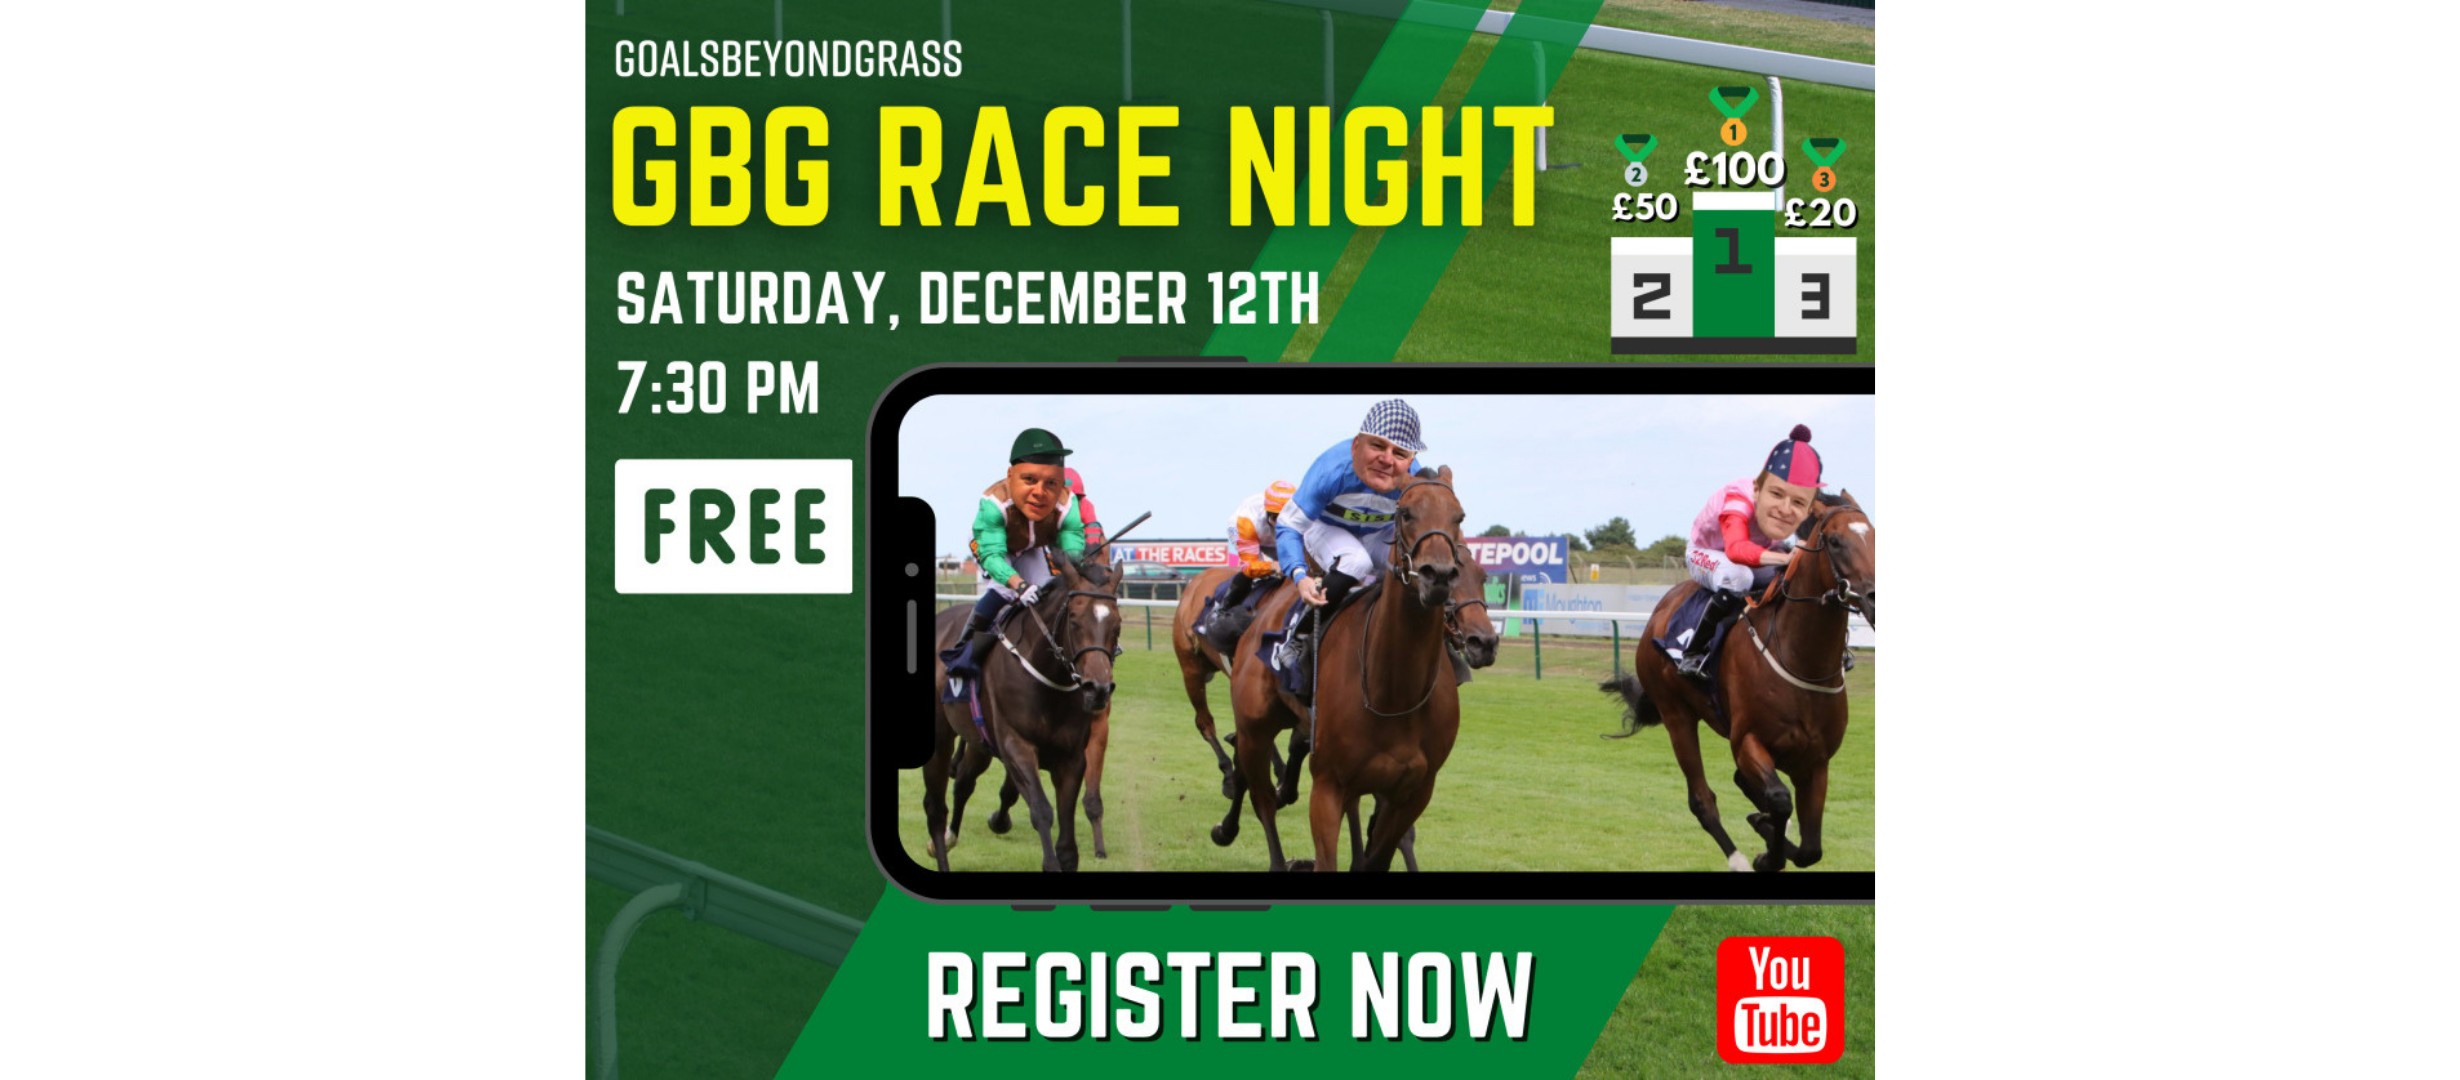 text 'goalsbeyondgrass GBG race night. Saturday, December 12th 7.30pm. Free. Register now. 1st prize £100, 2nd prize £50, 3rd prize £20' Images of horses racing with people riding. Youtube logo.